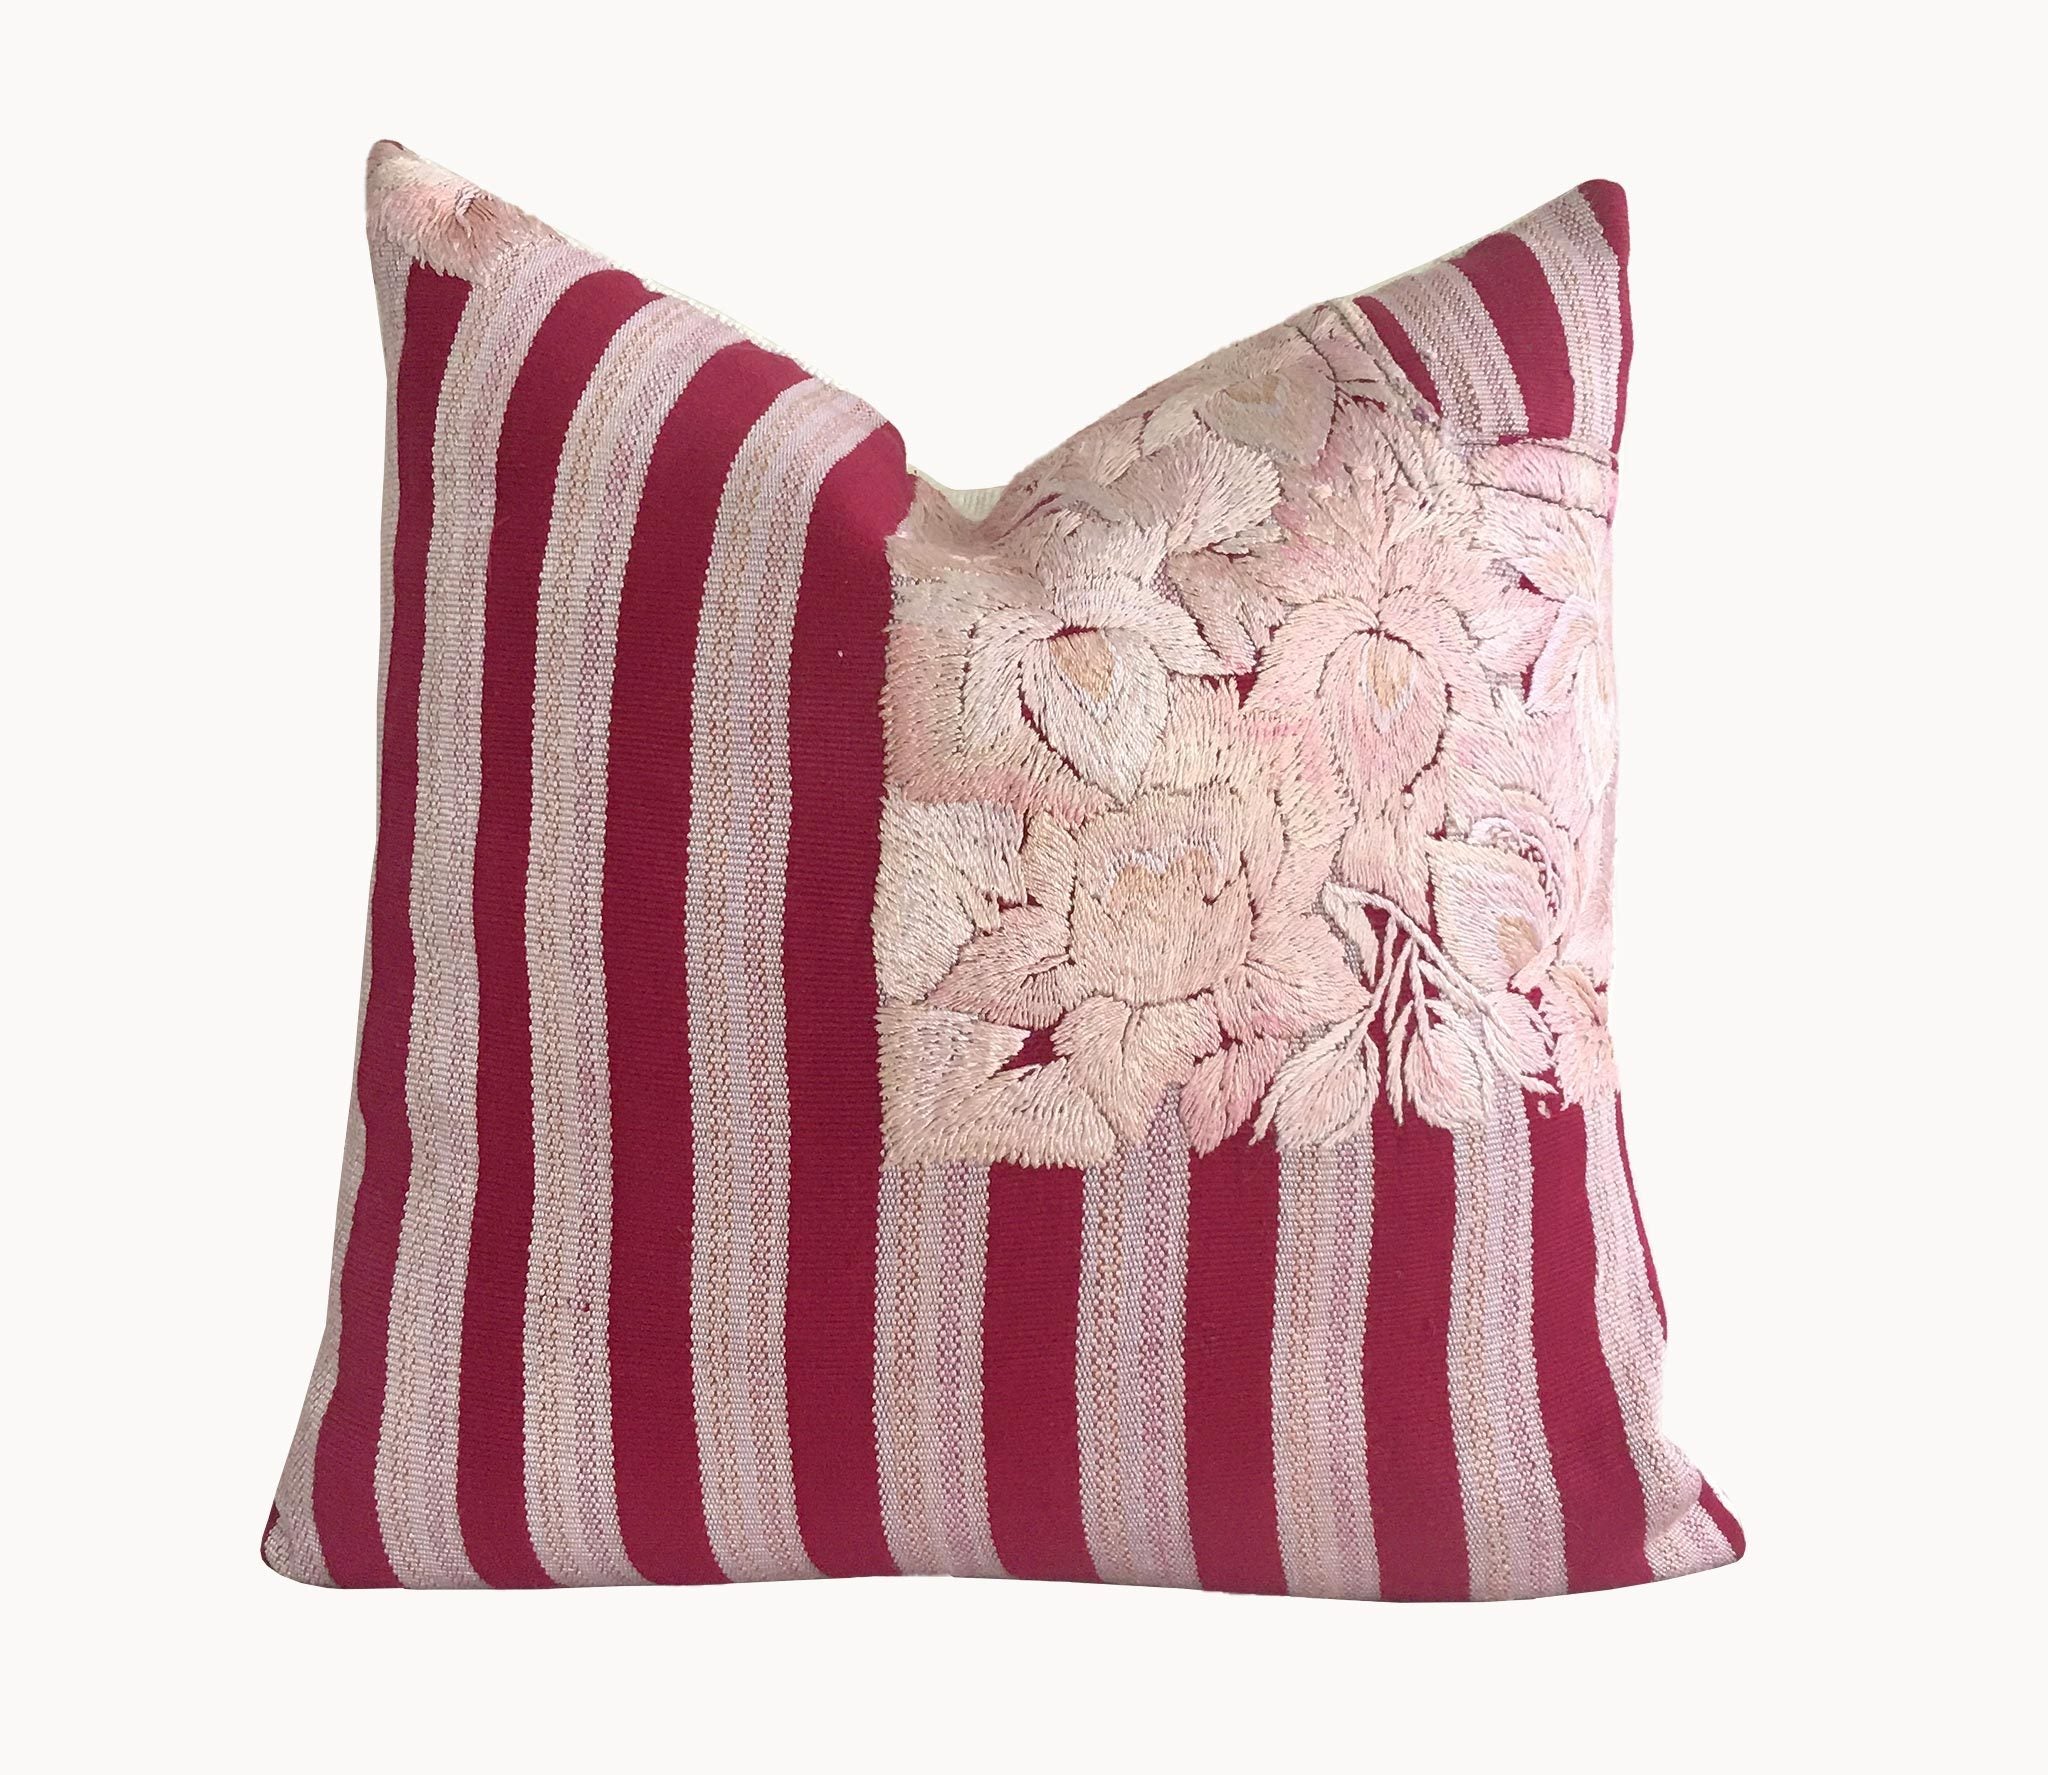 Guatemalan Huipil Pillow, vintage, hand woven red and pink striped floral throw cushion from Patzun